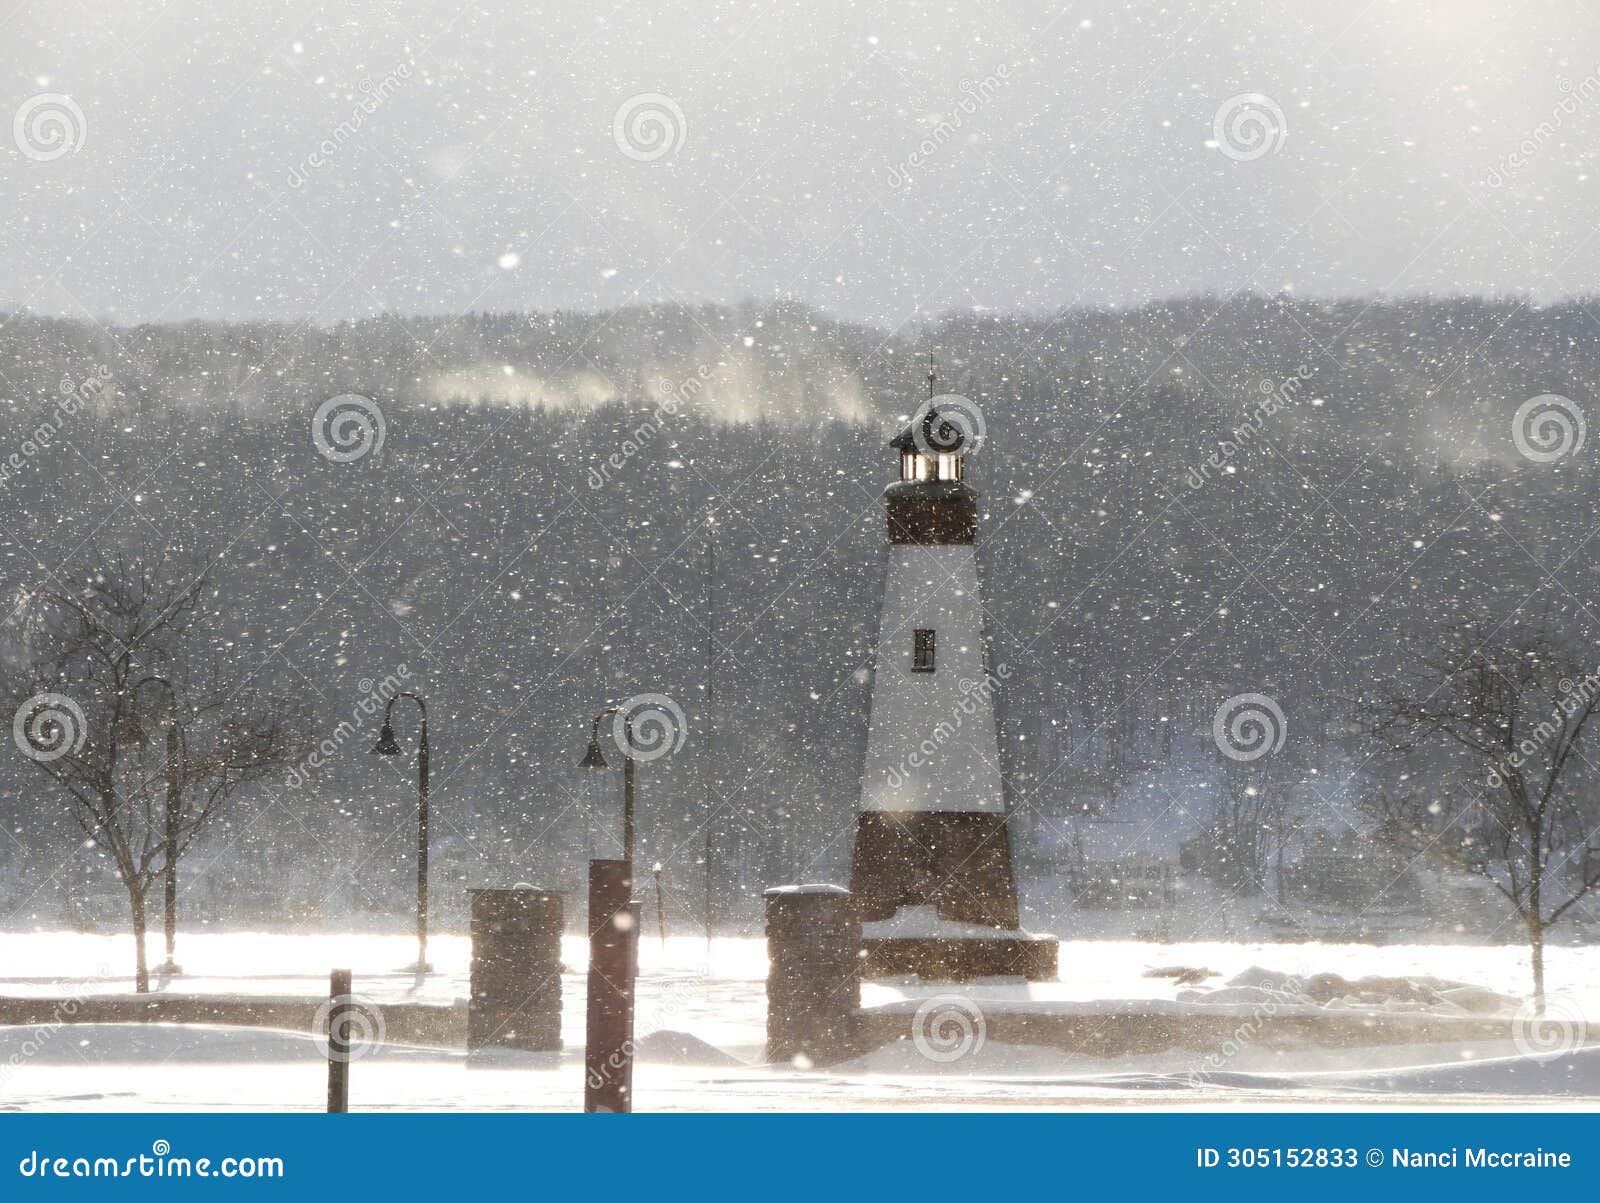 fingerlakes lighthouse on cayuga lake during a winter snow squall